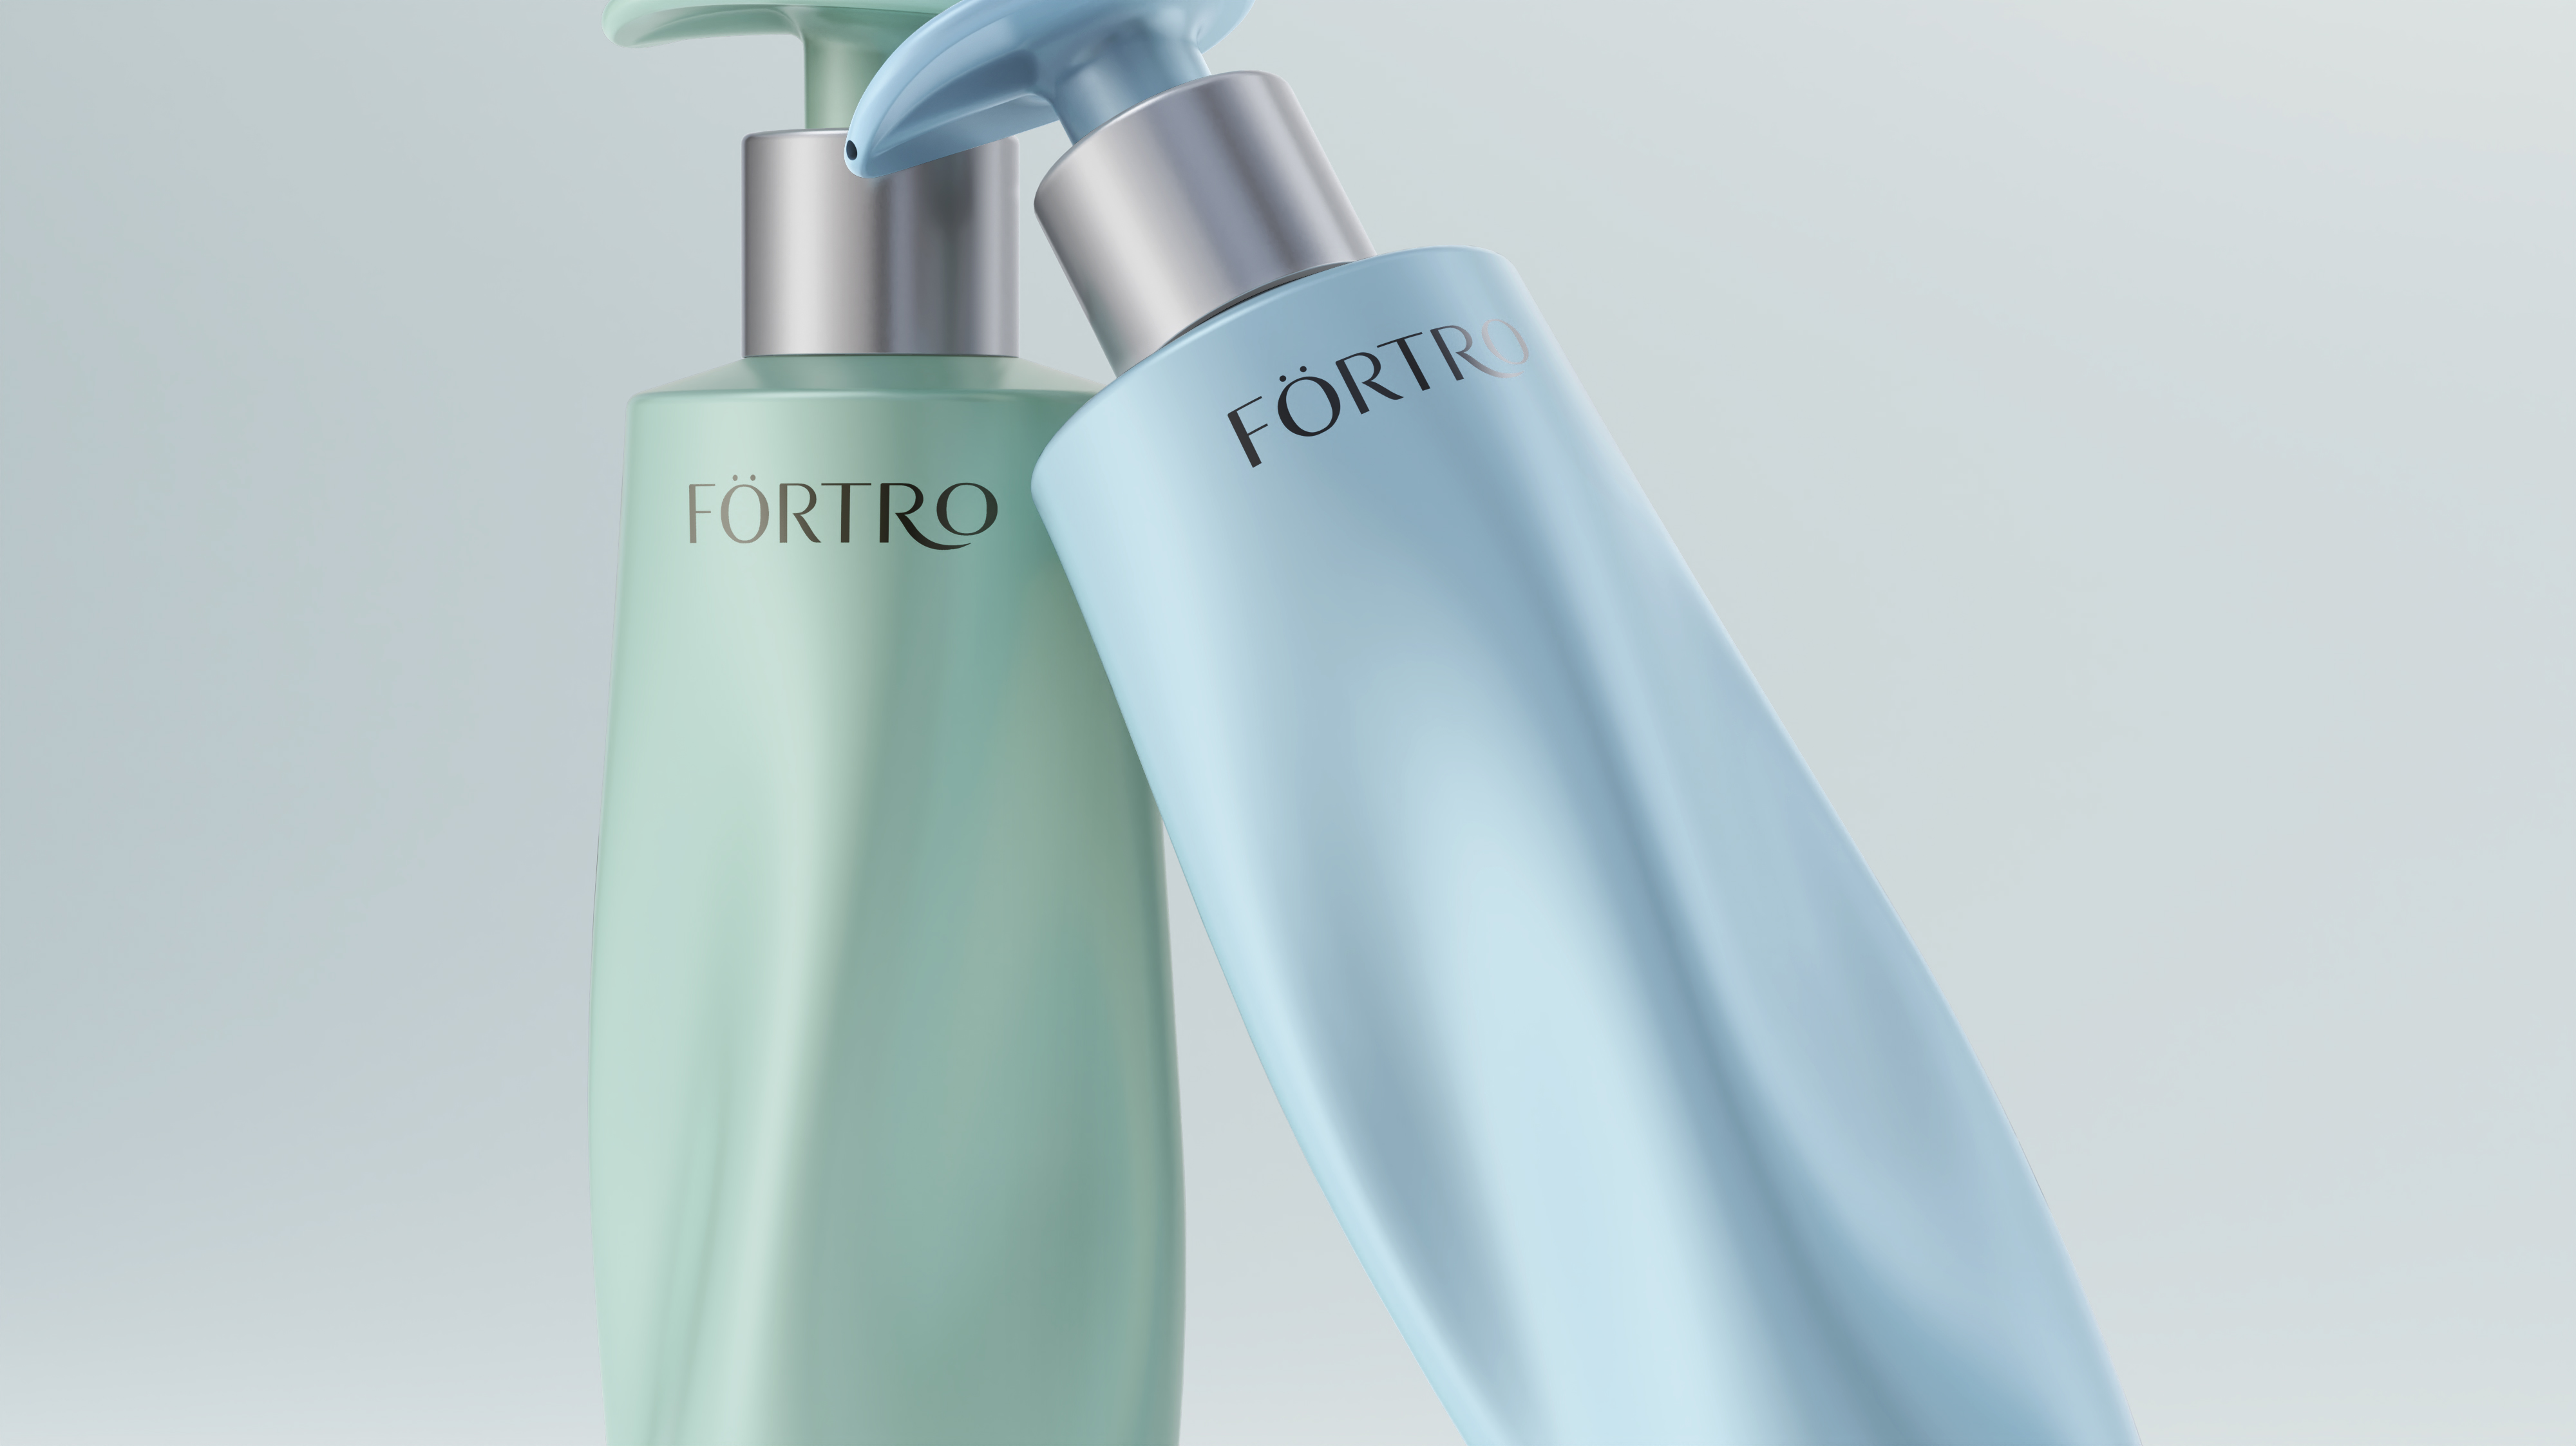 THE PACKAGING OF HUA AN TANG FORTRO SHAMPOO